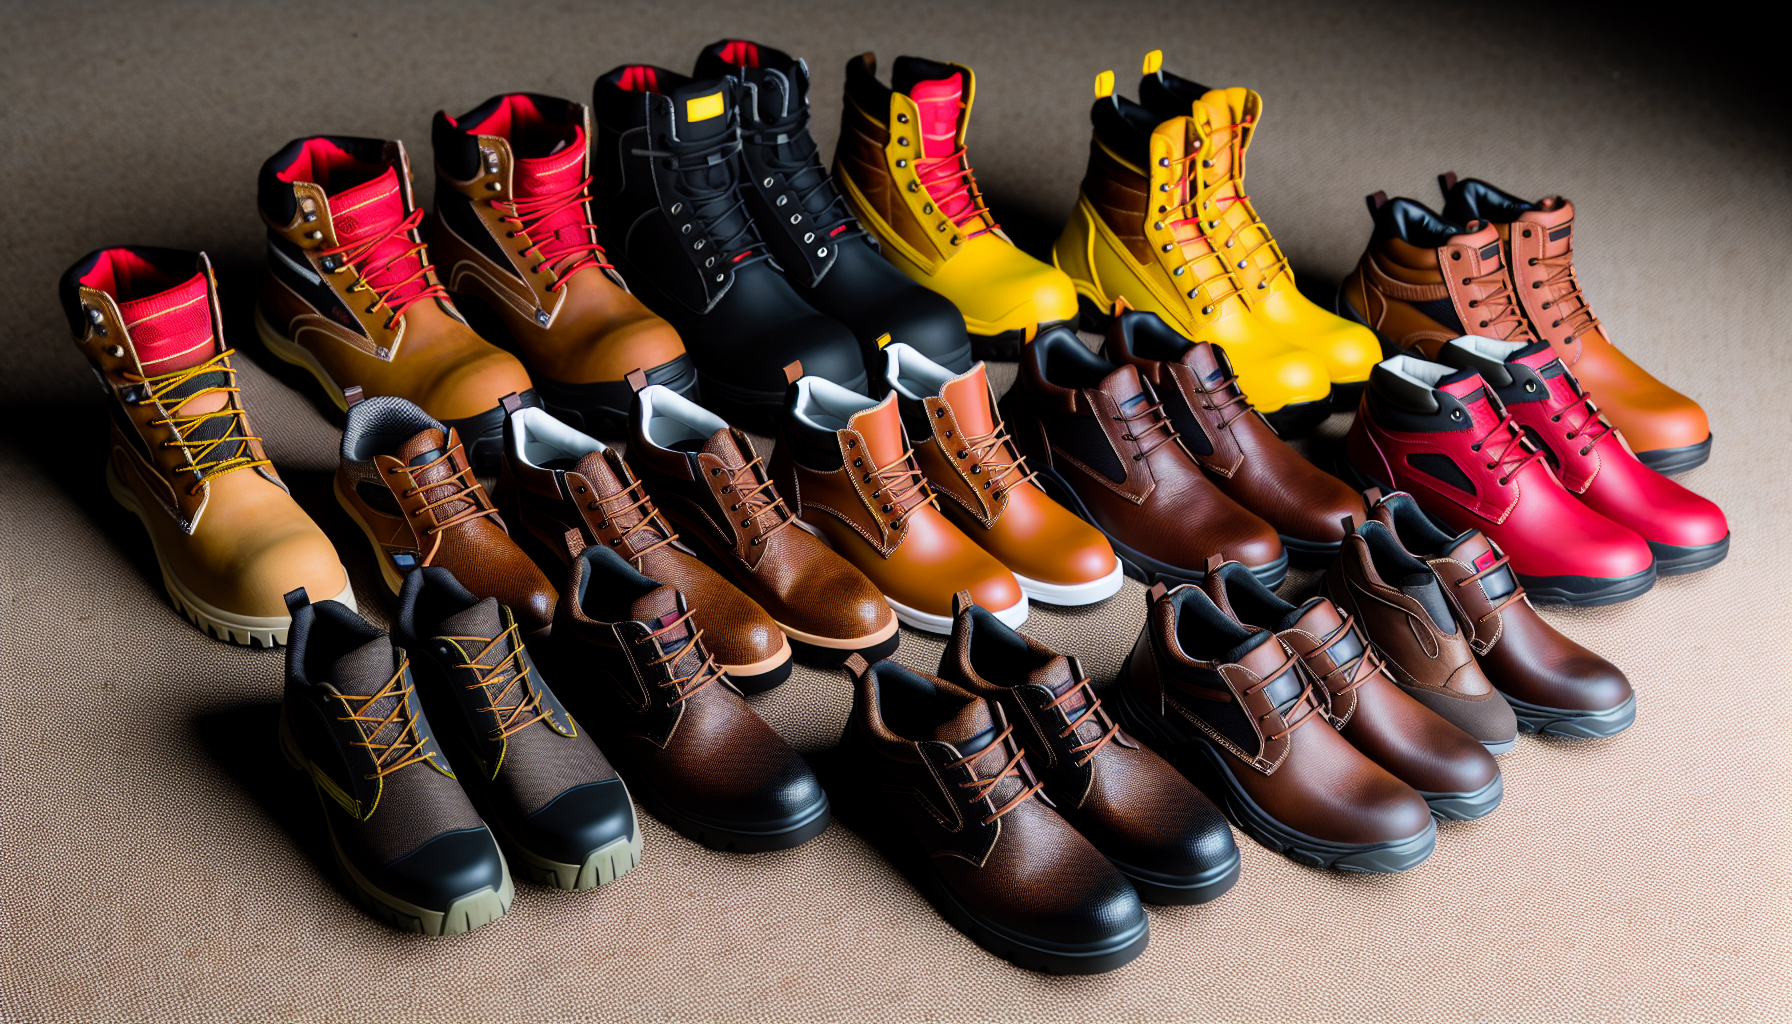 A variety of safety shoes and boots